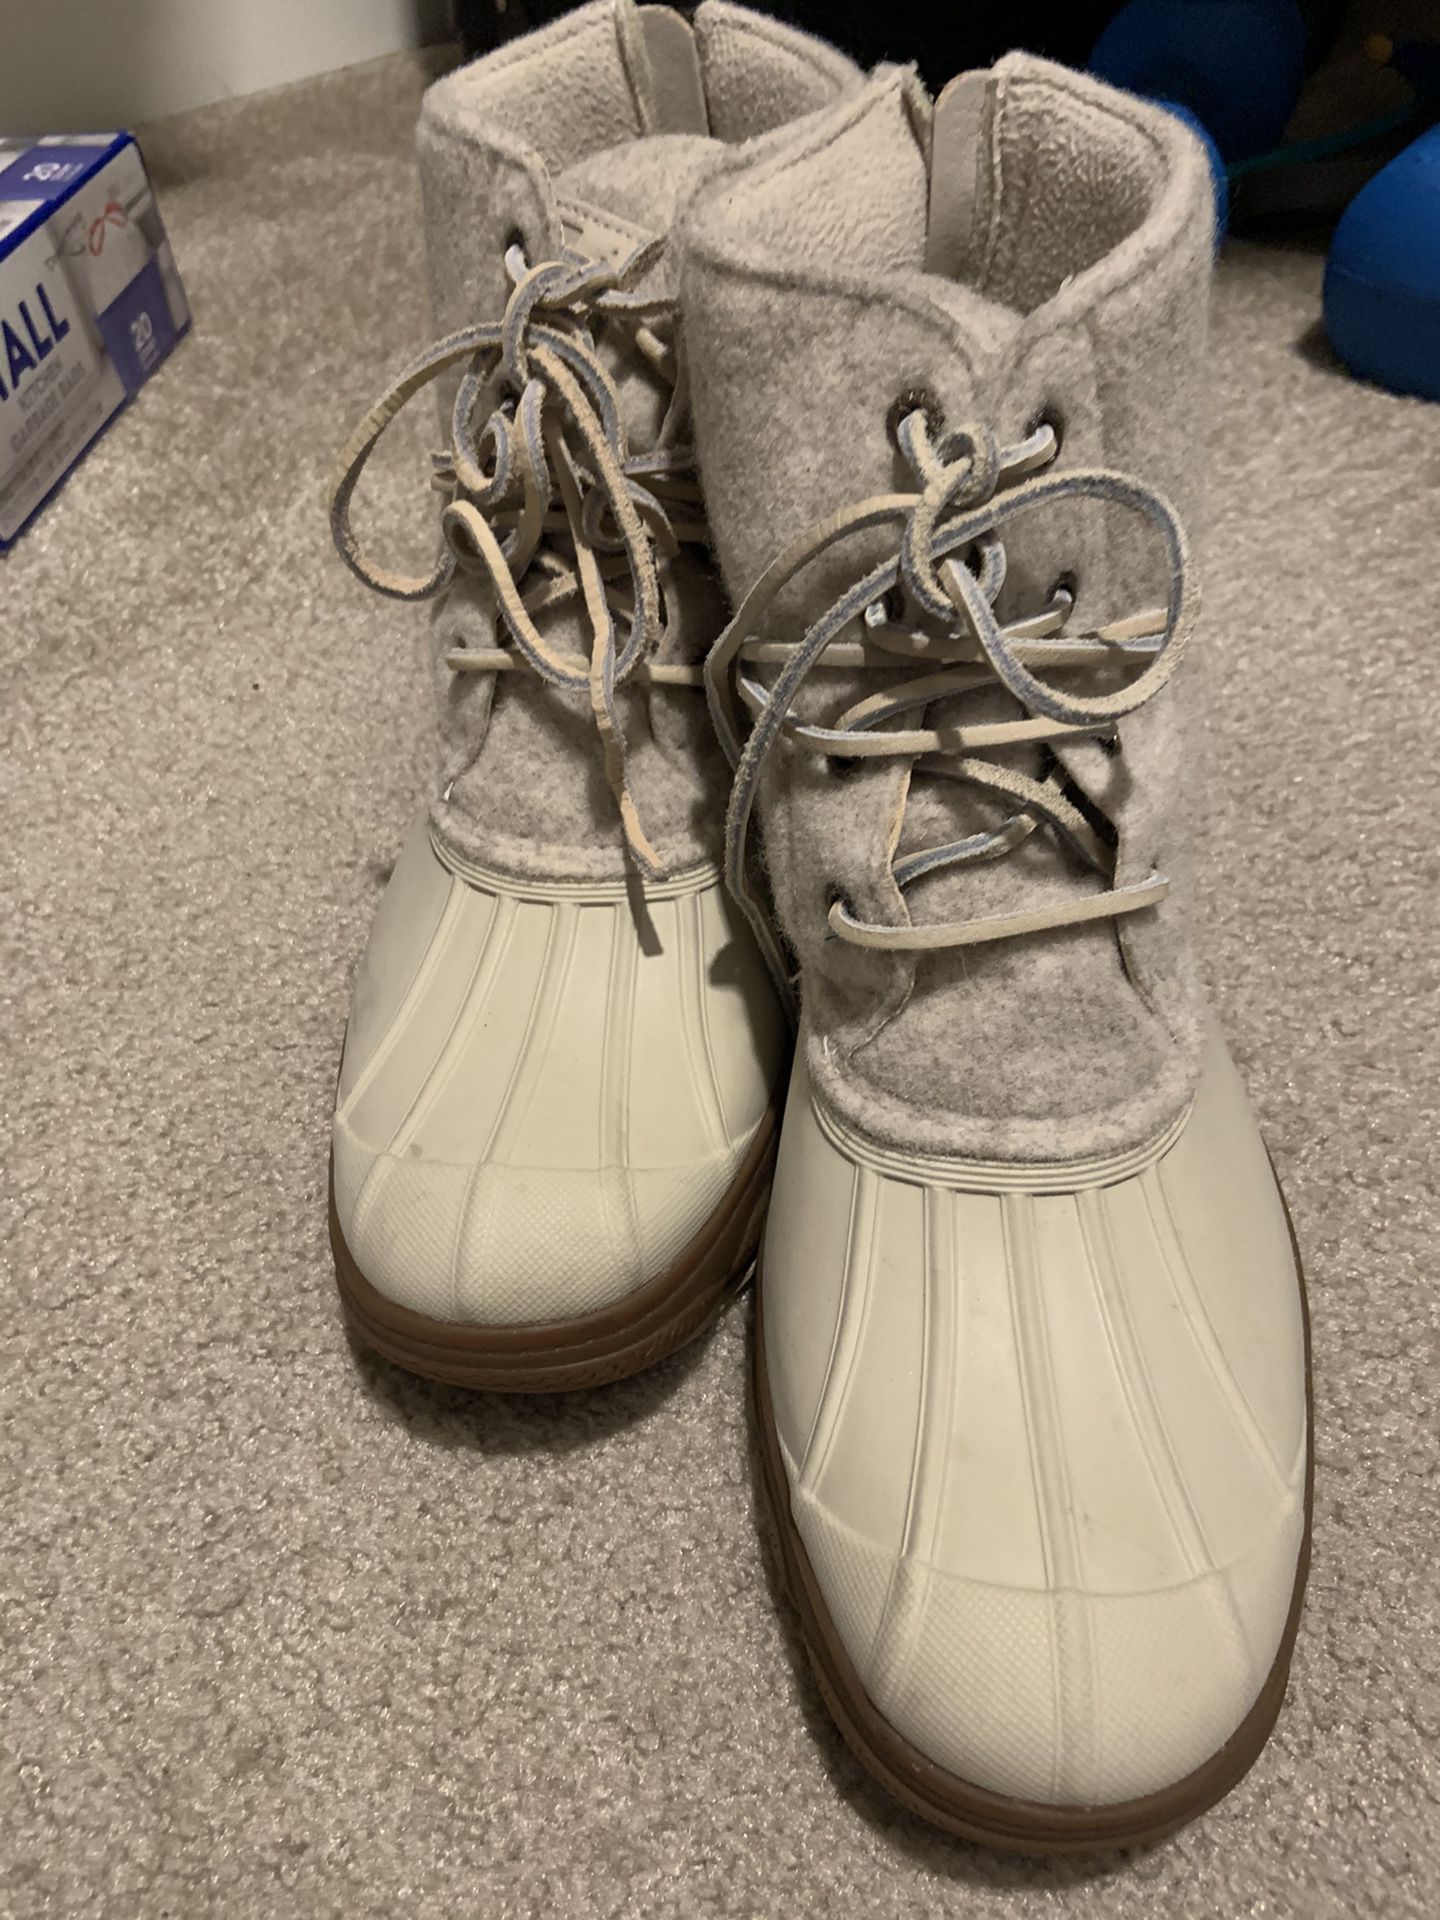 Sperry Size 9 Women’s Boots